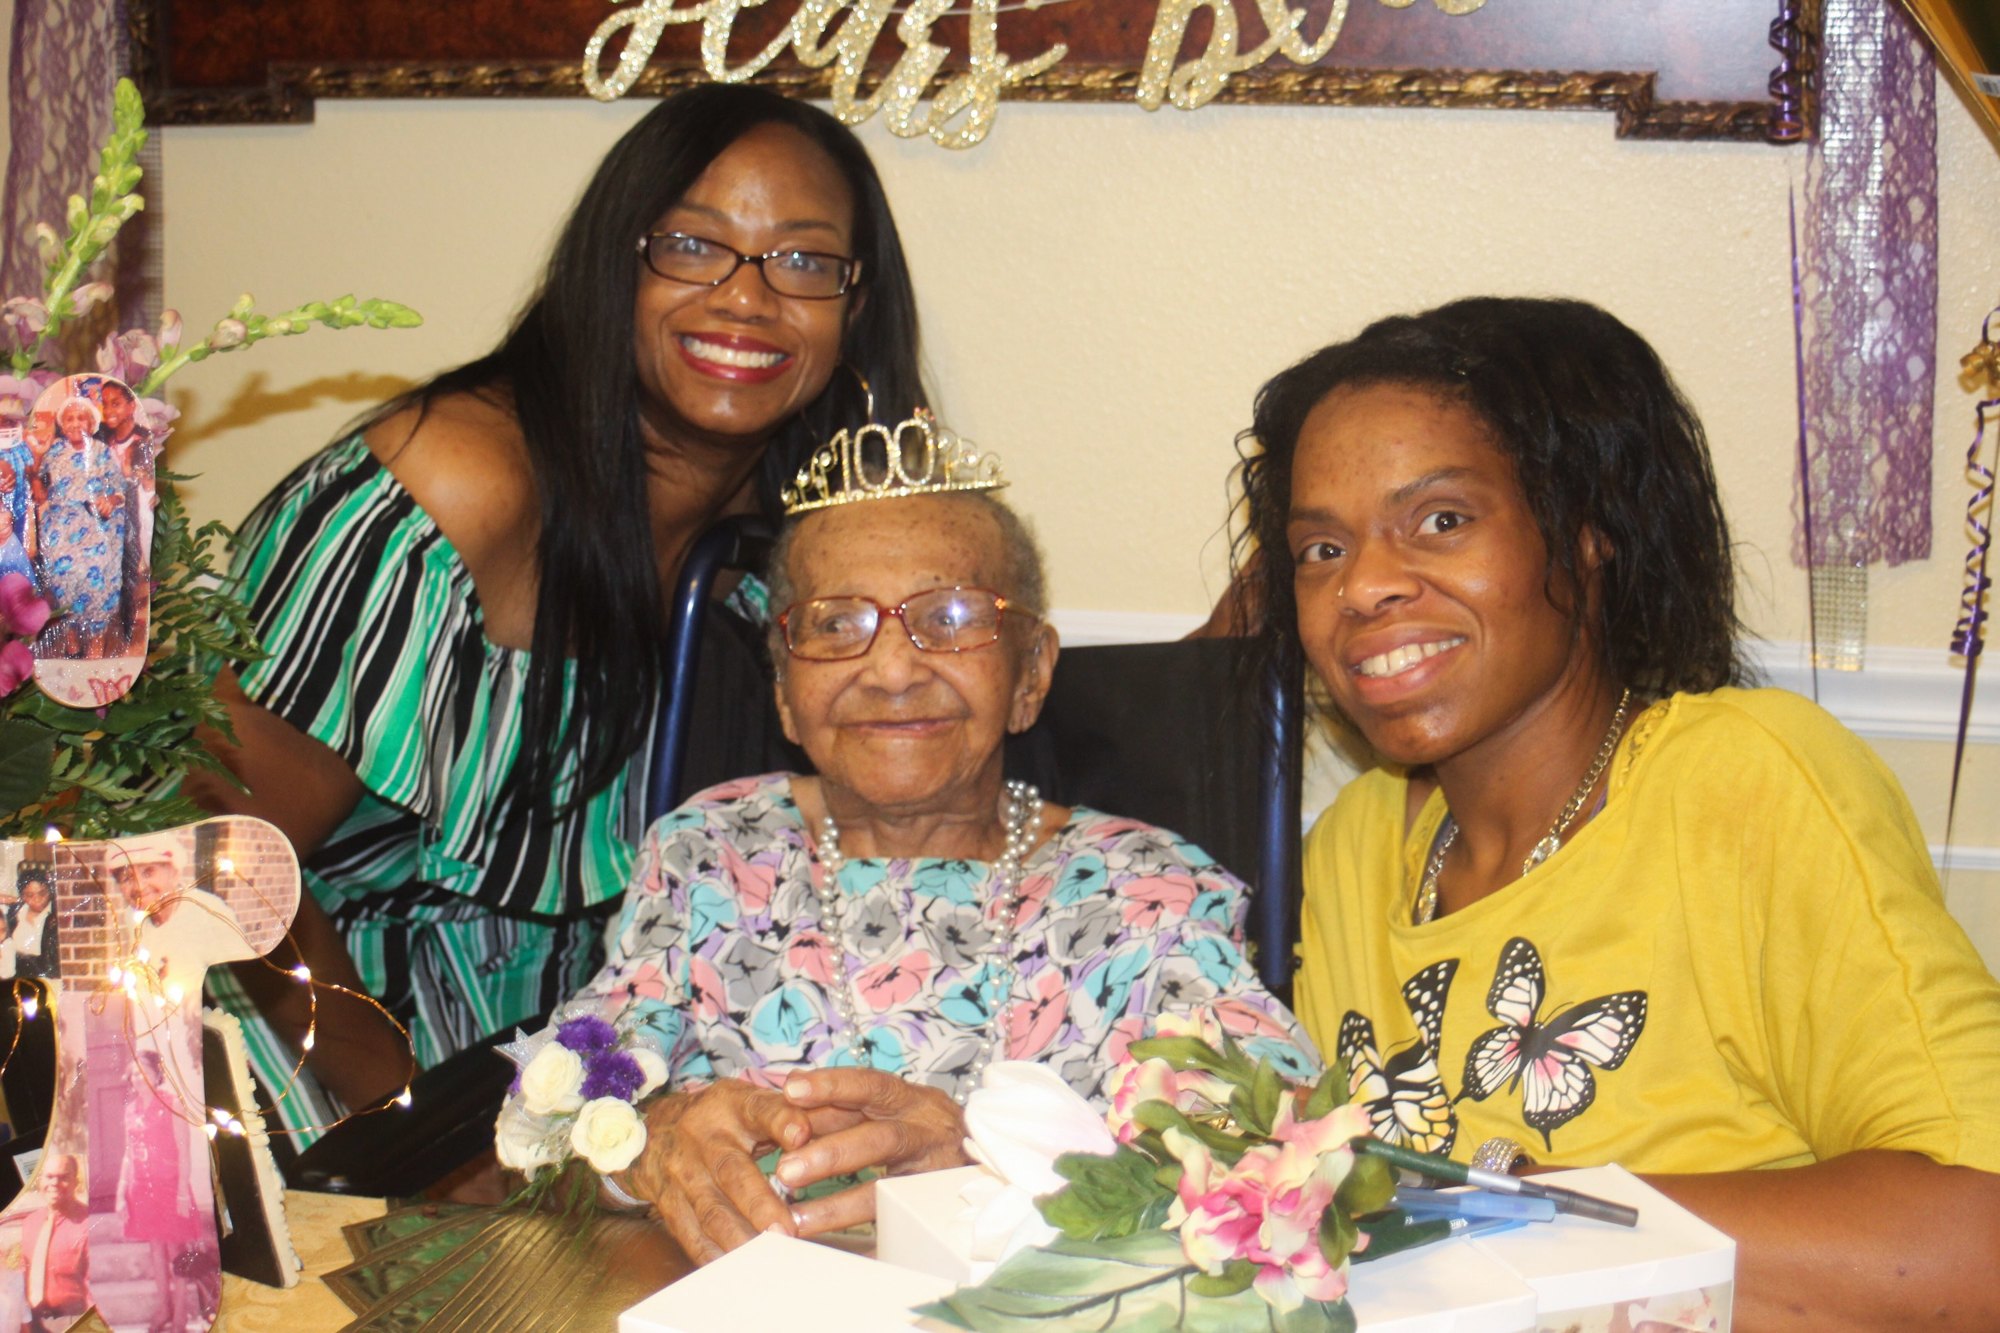 Marjorie Violet Graham (middle) celebrates her 100th birthday with two of her granddaughters, Najah Adams and Tamara Gibson-Alonso. Photo courtesy of Sandra Golden